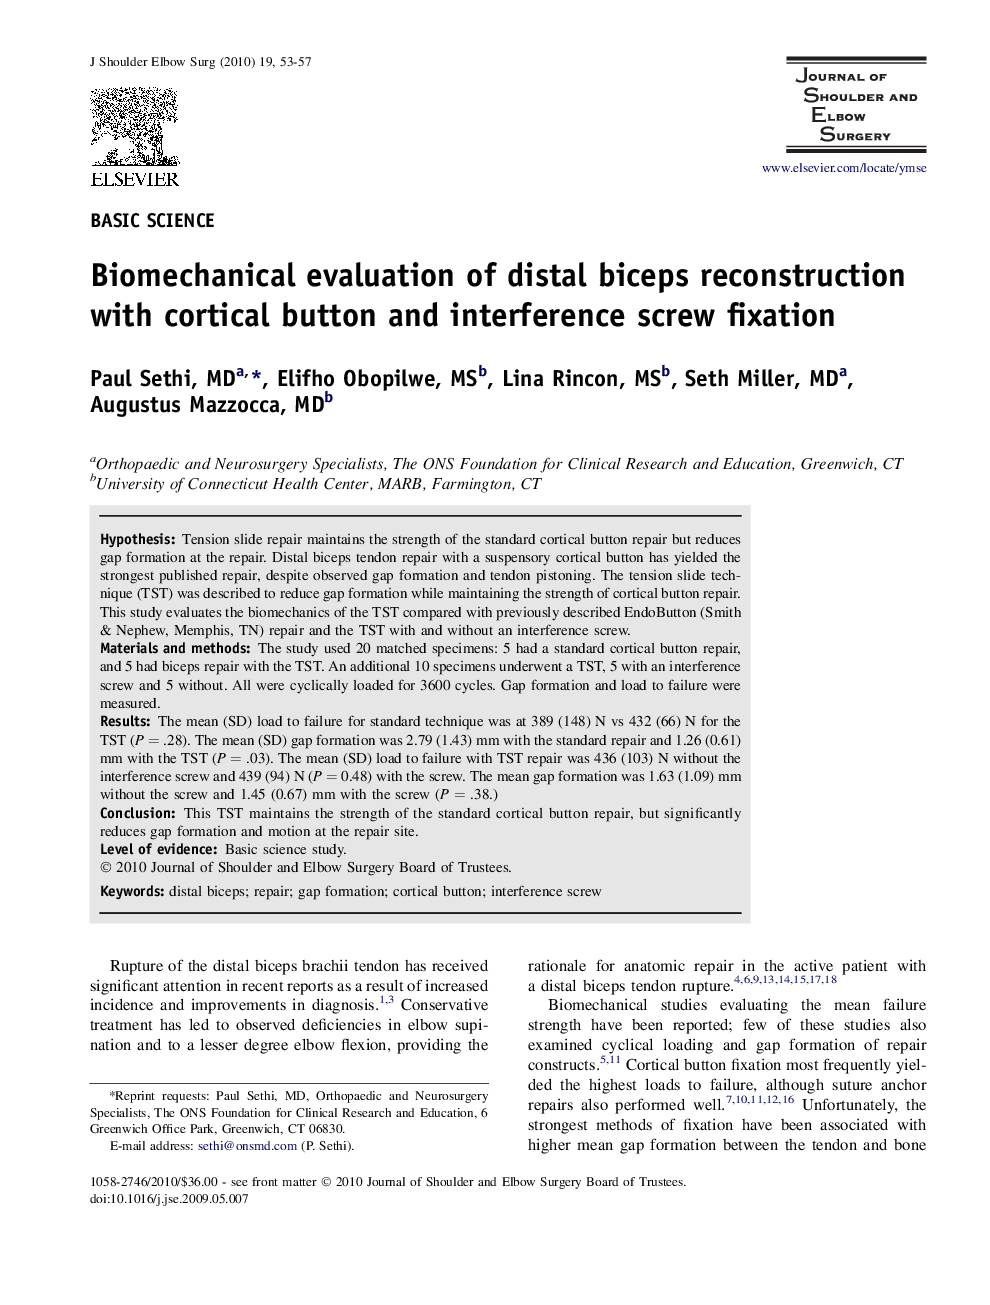 Biomechanical evaluation of distal biceps reconstruction with cortical button and interference screw fixation